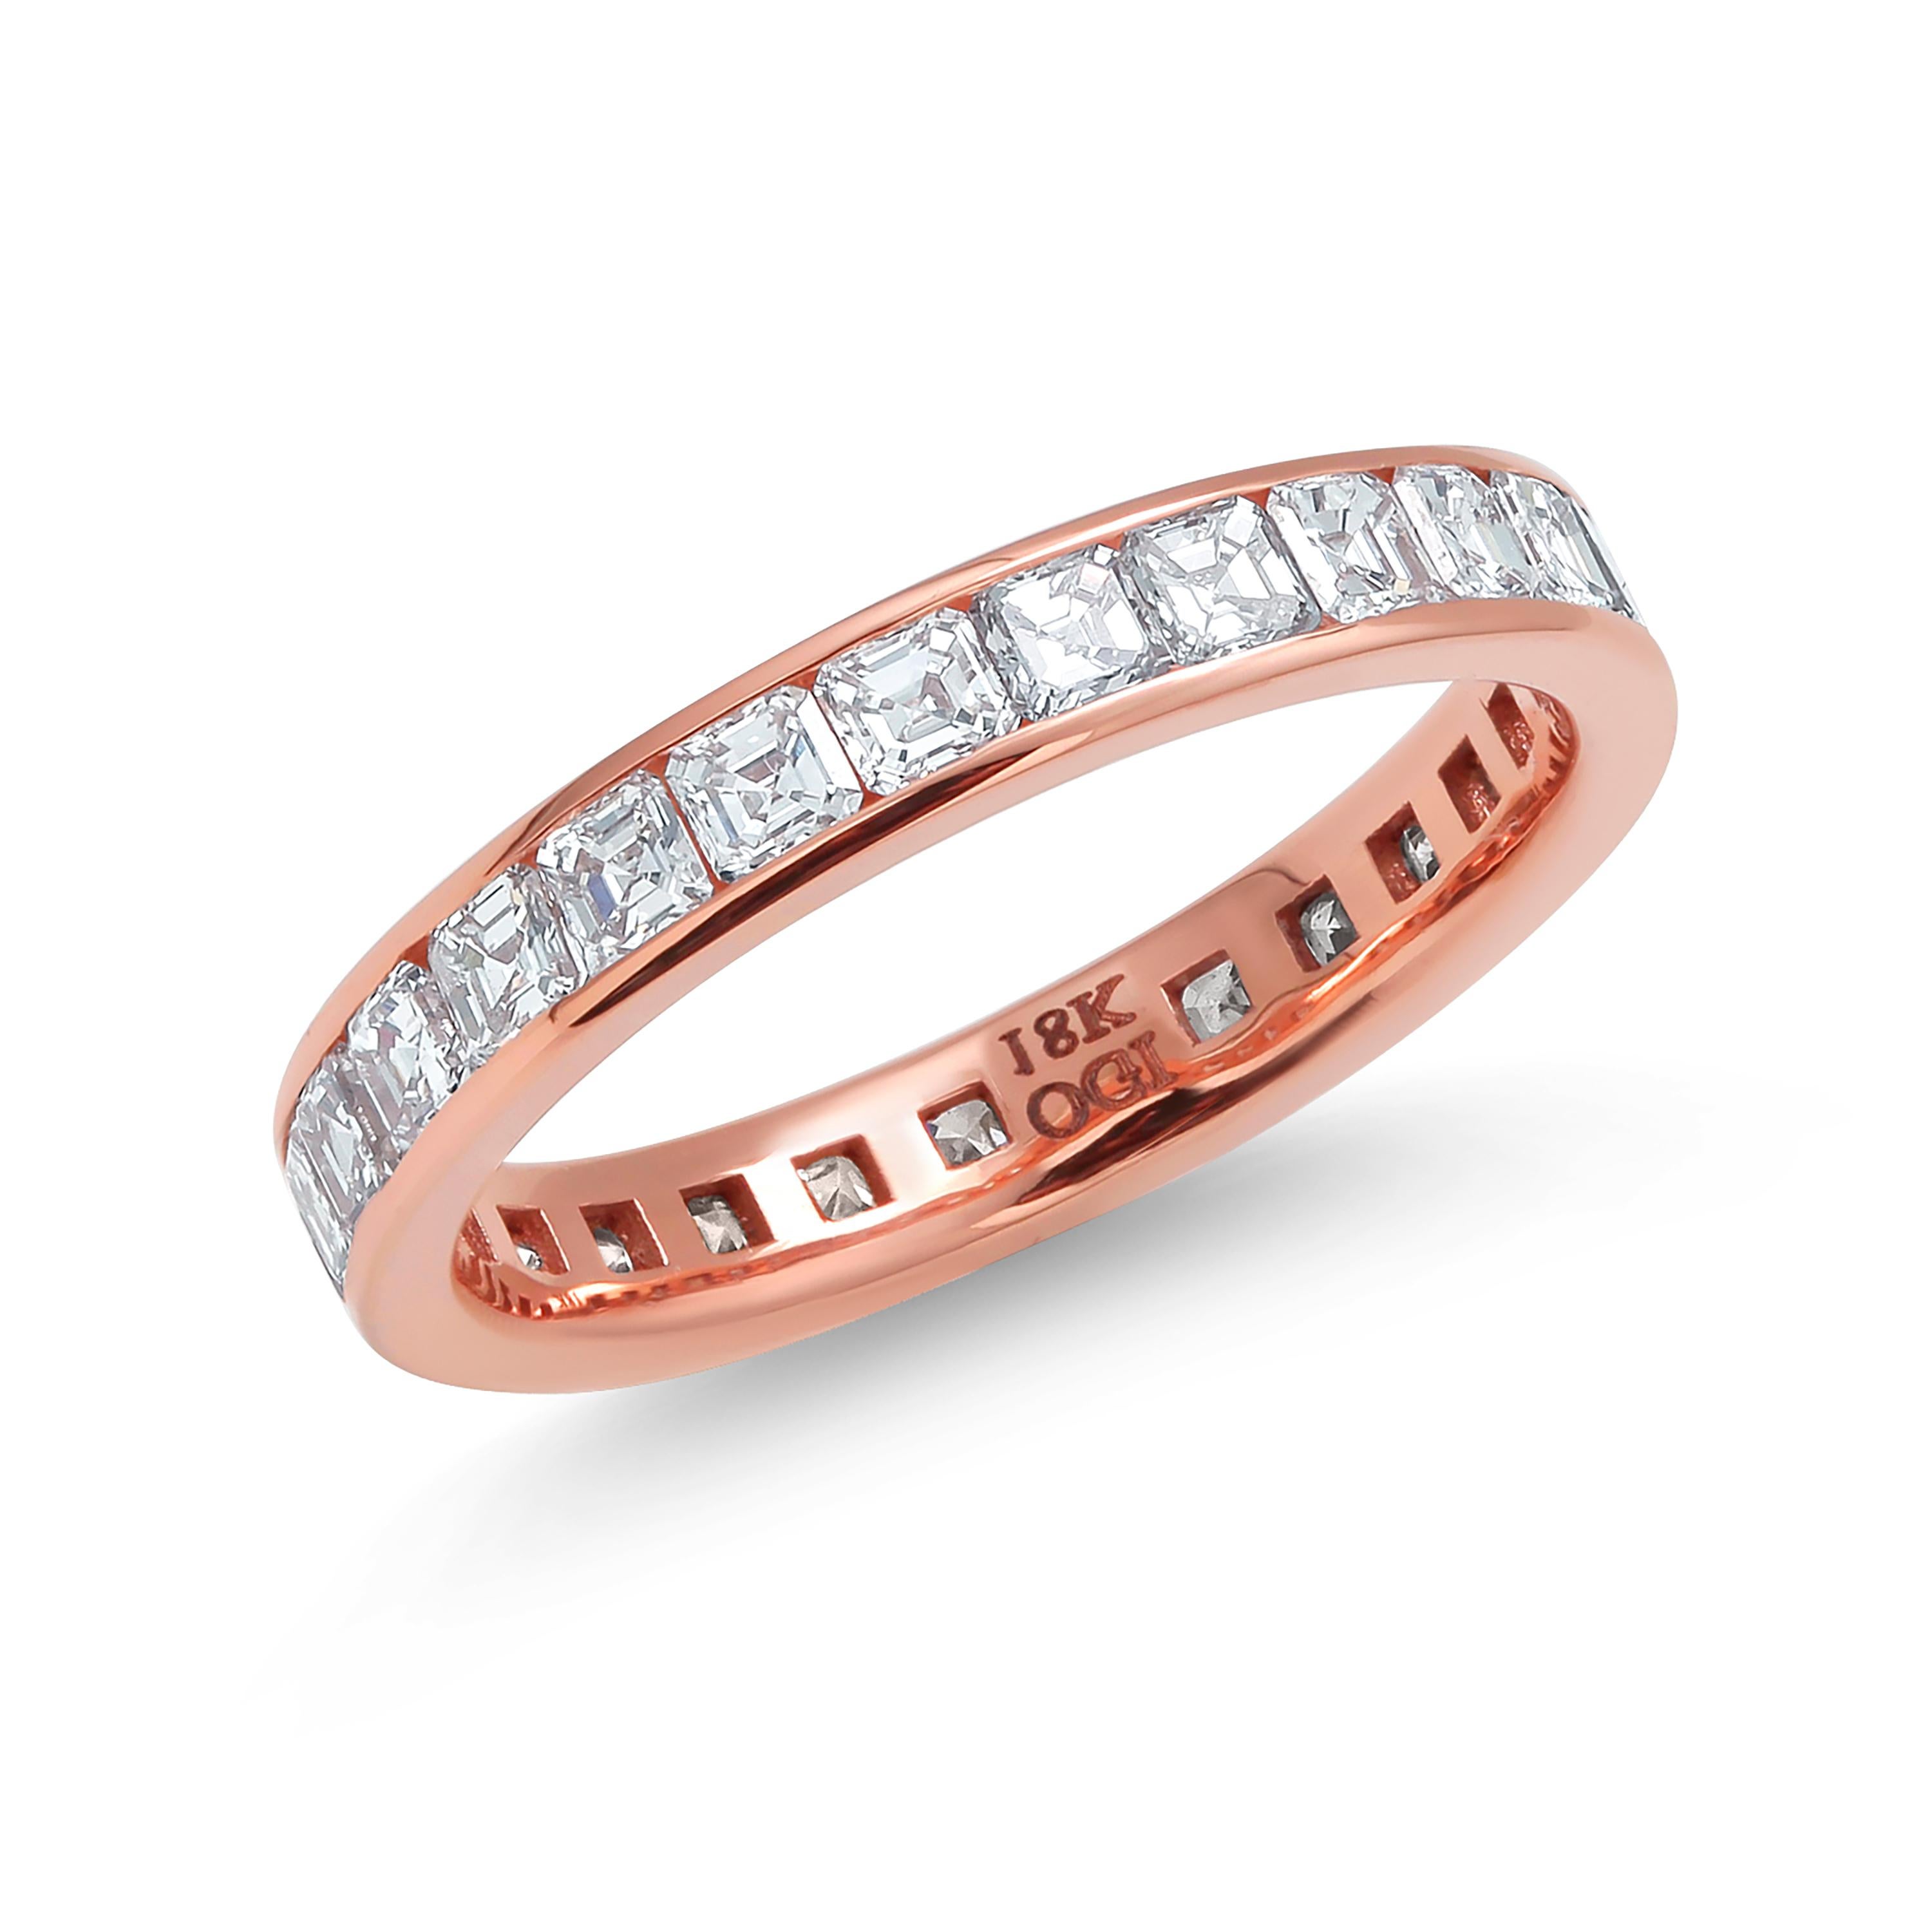 Asscher Diamond 2.15 Carat Eighteen Karat Rose Gold Eternity Band Size 6 In New Condition For Sale In New York, NY